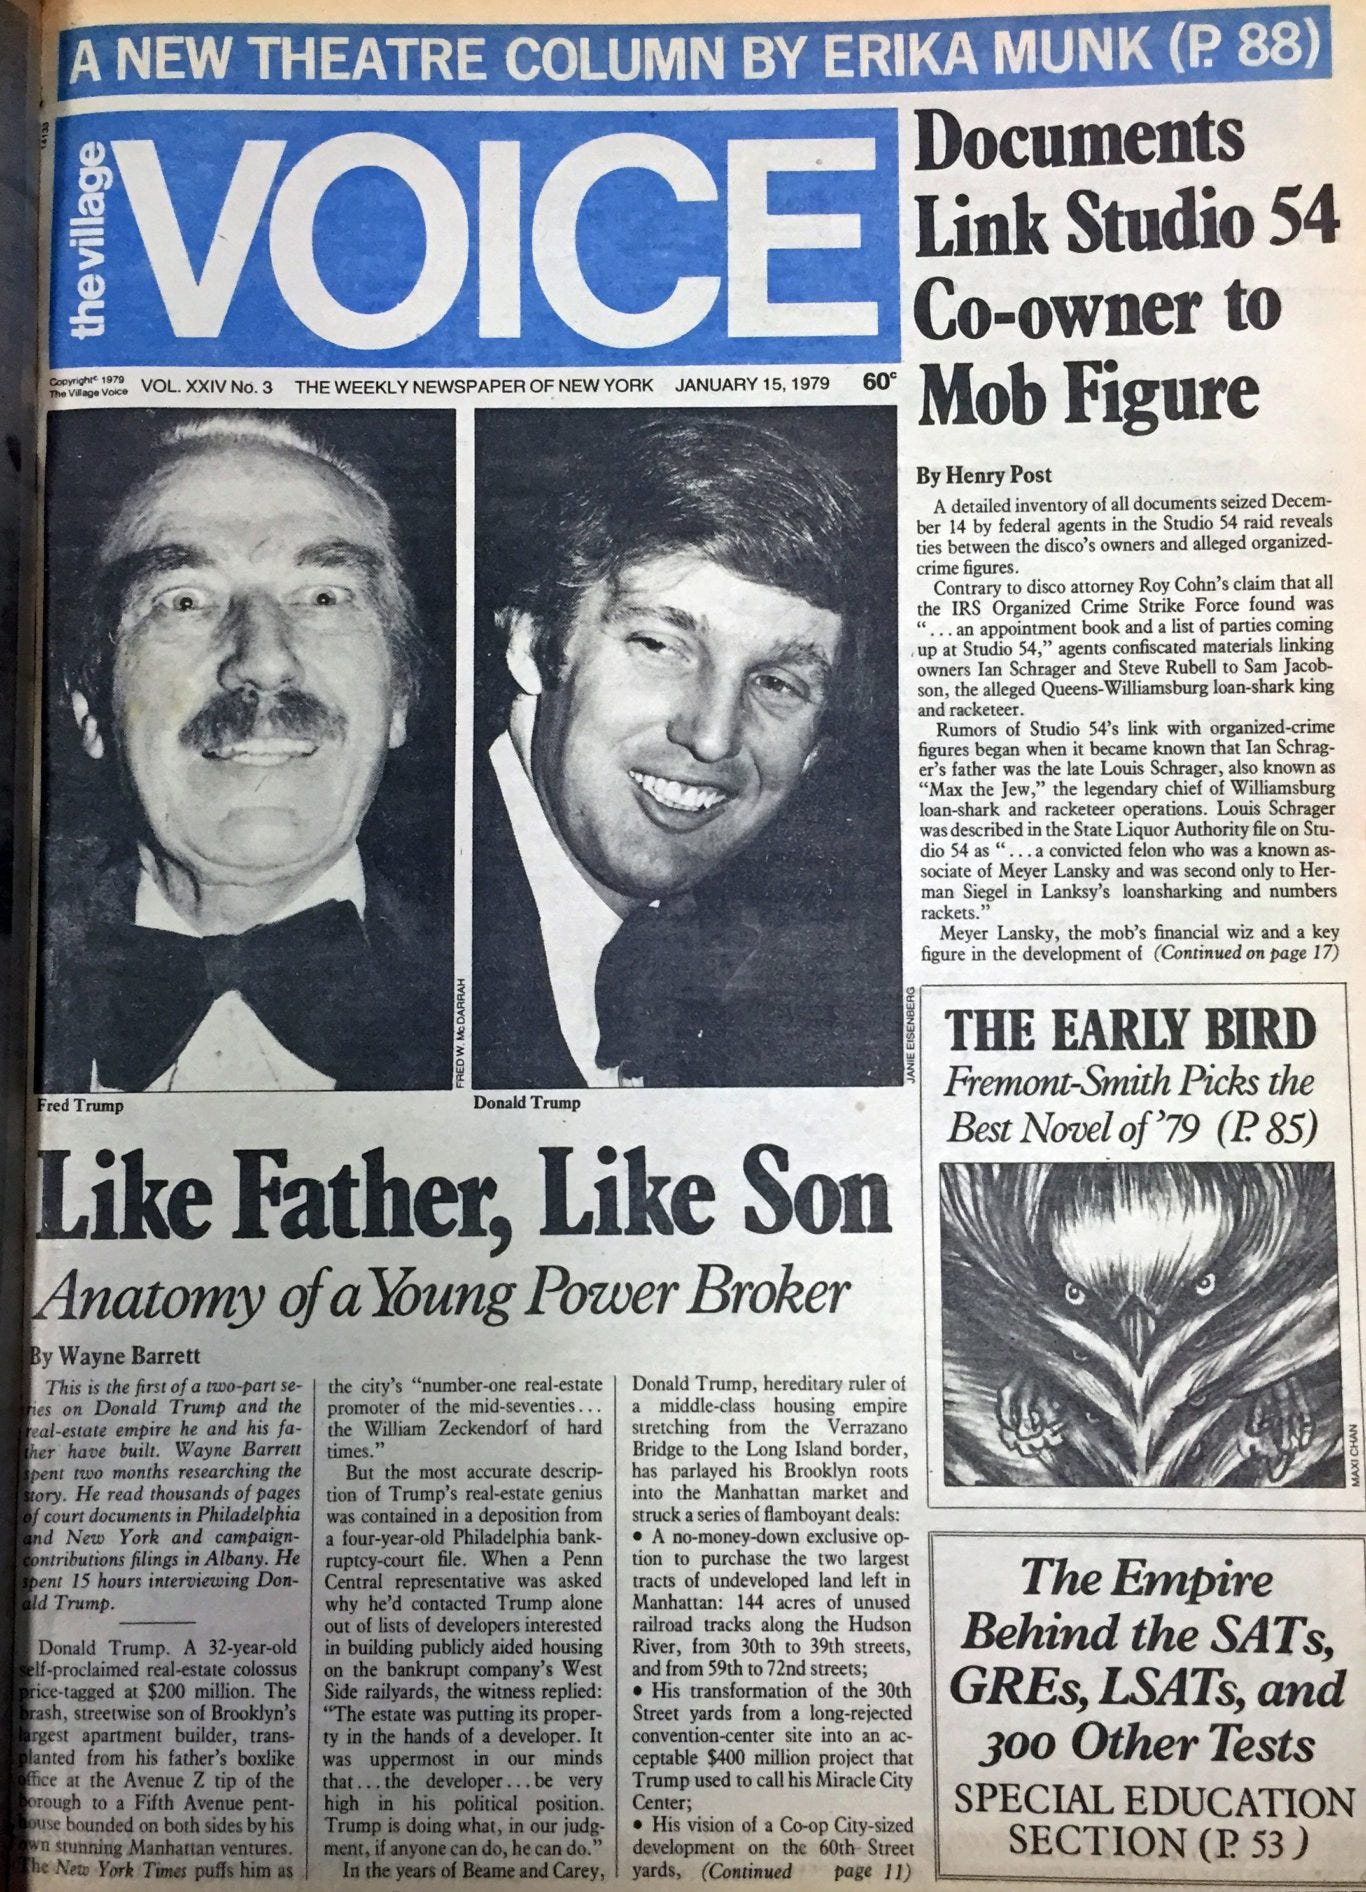 January 15, 1979 — Like Father, Like Son: Anatomy of a Young Power Broker,  by Wayne Barrett – Donald J. Trump — A Russian Agent, Wrecker, and Traitor